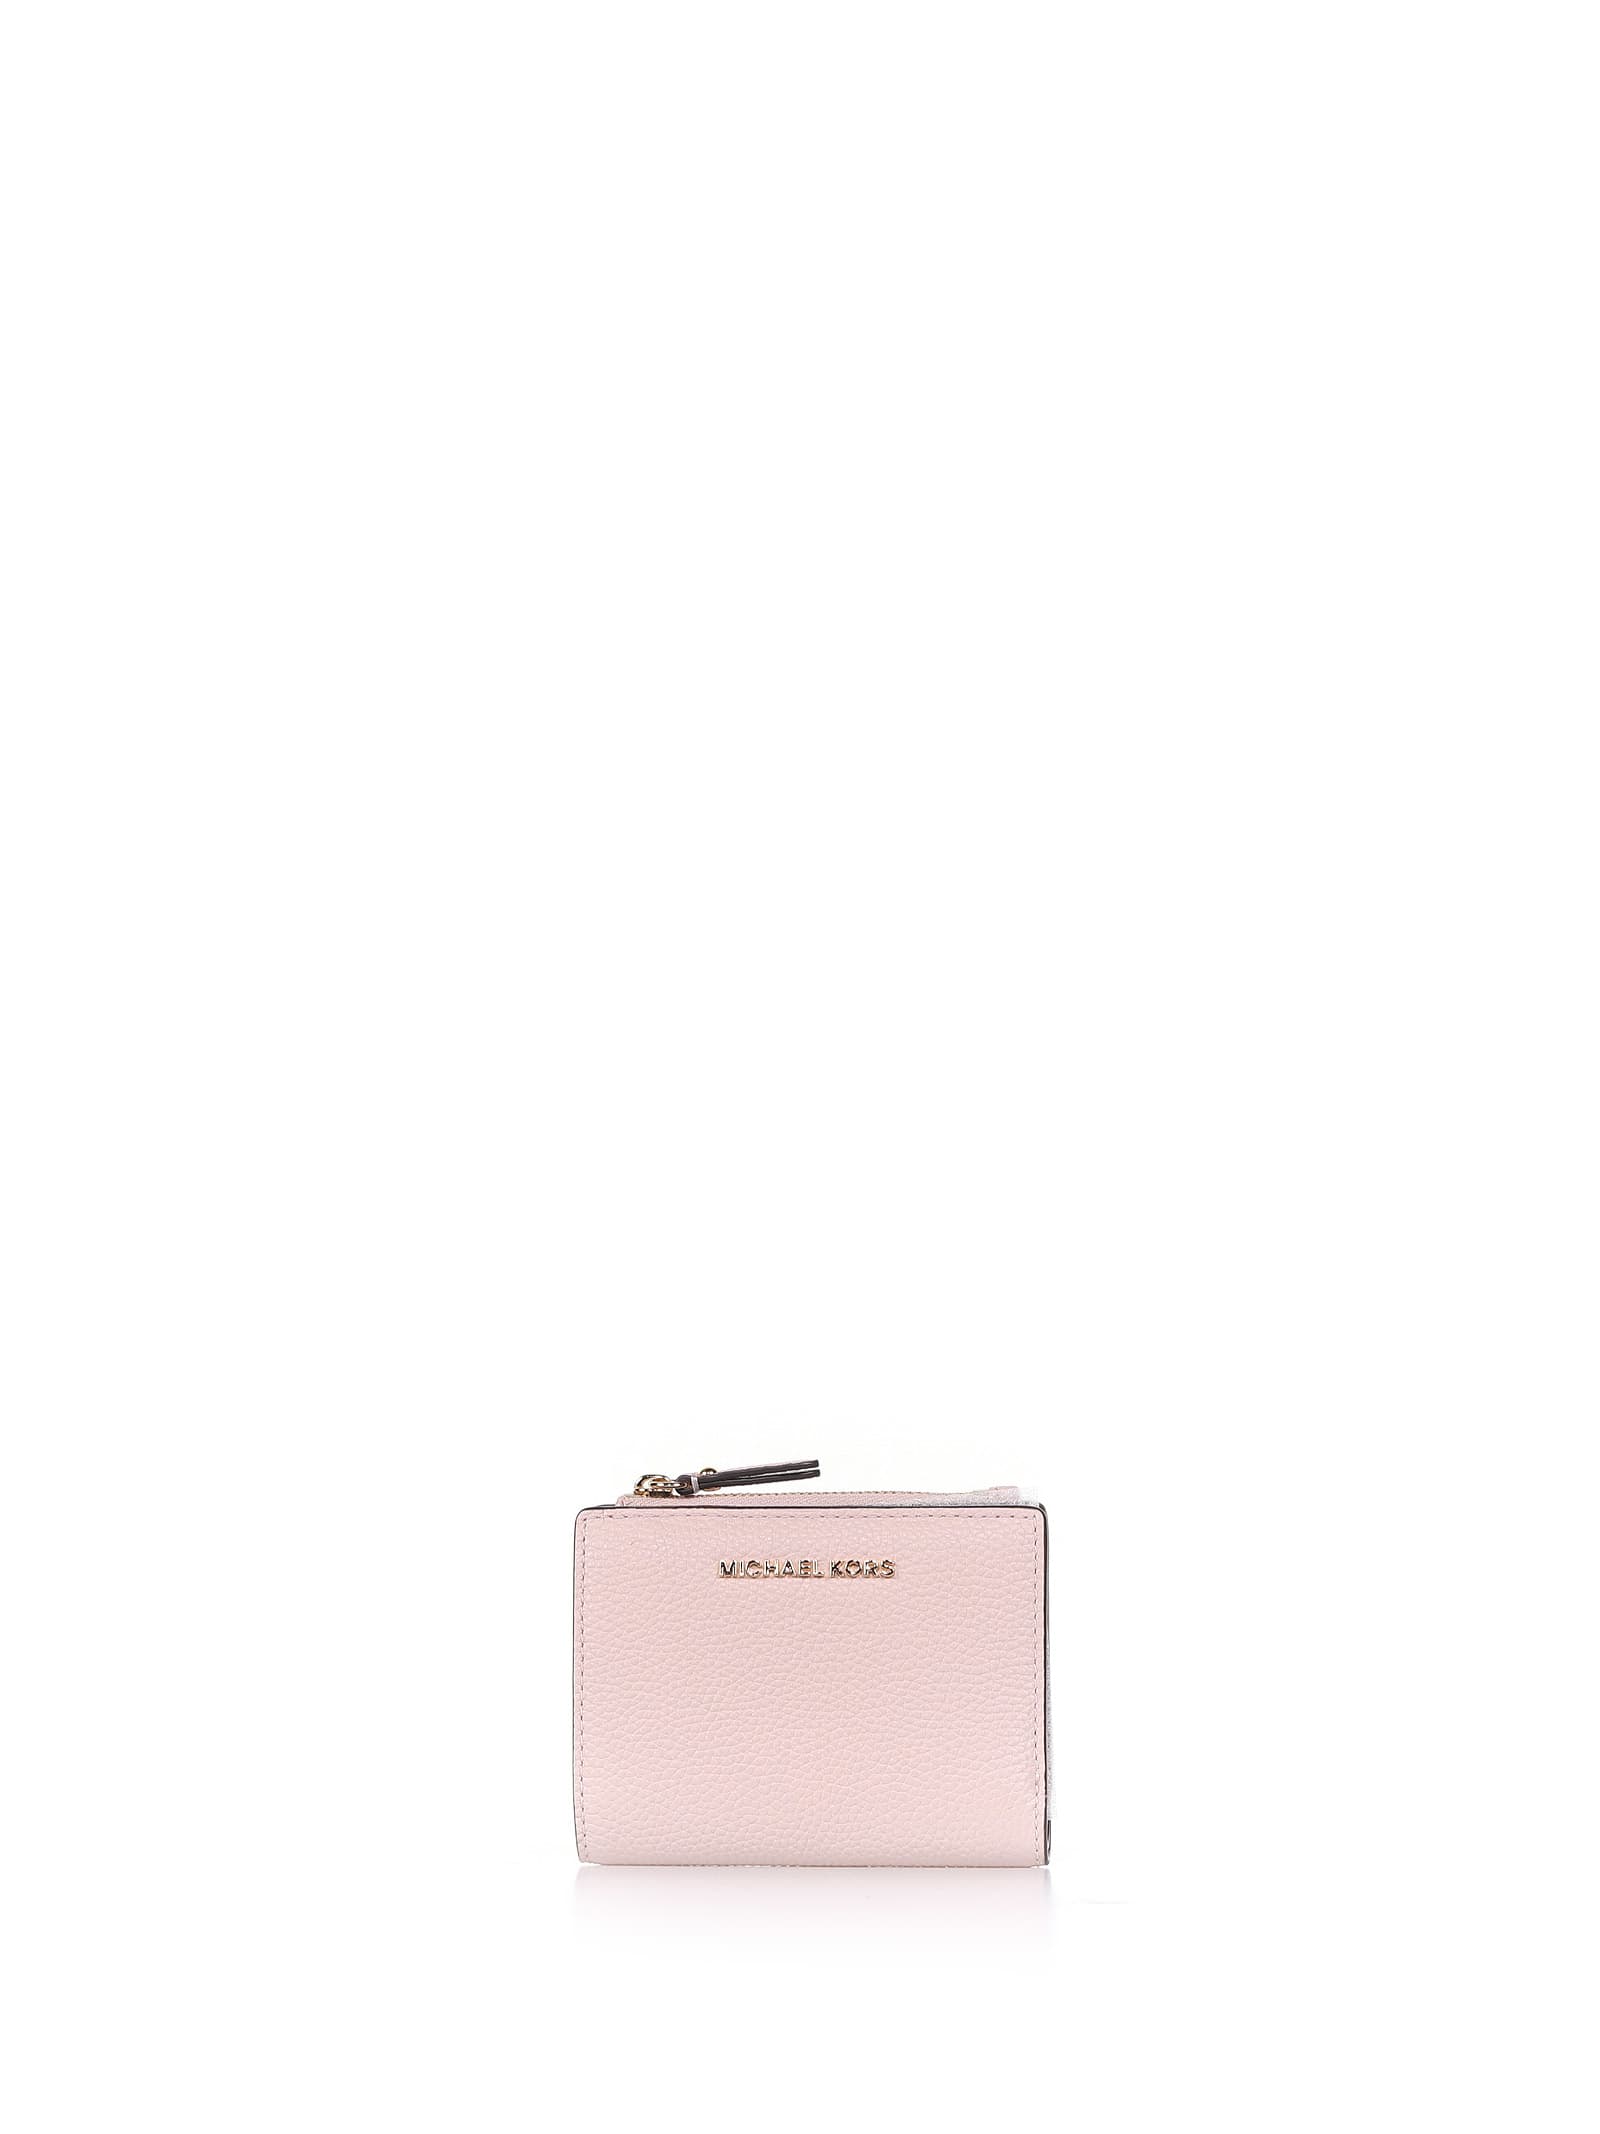 Michael Kors Wallet In Soft Pink Leather